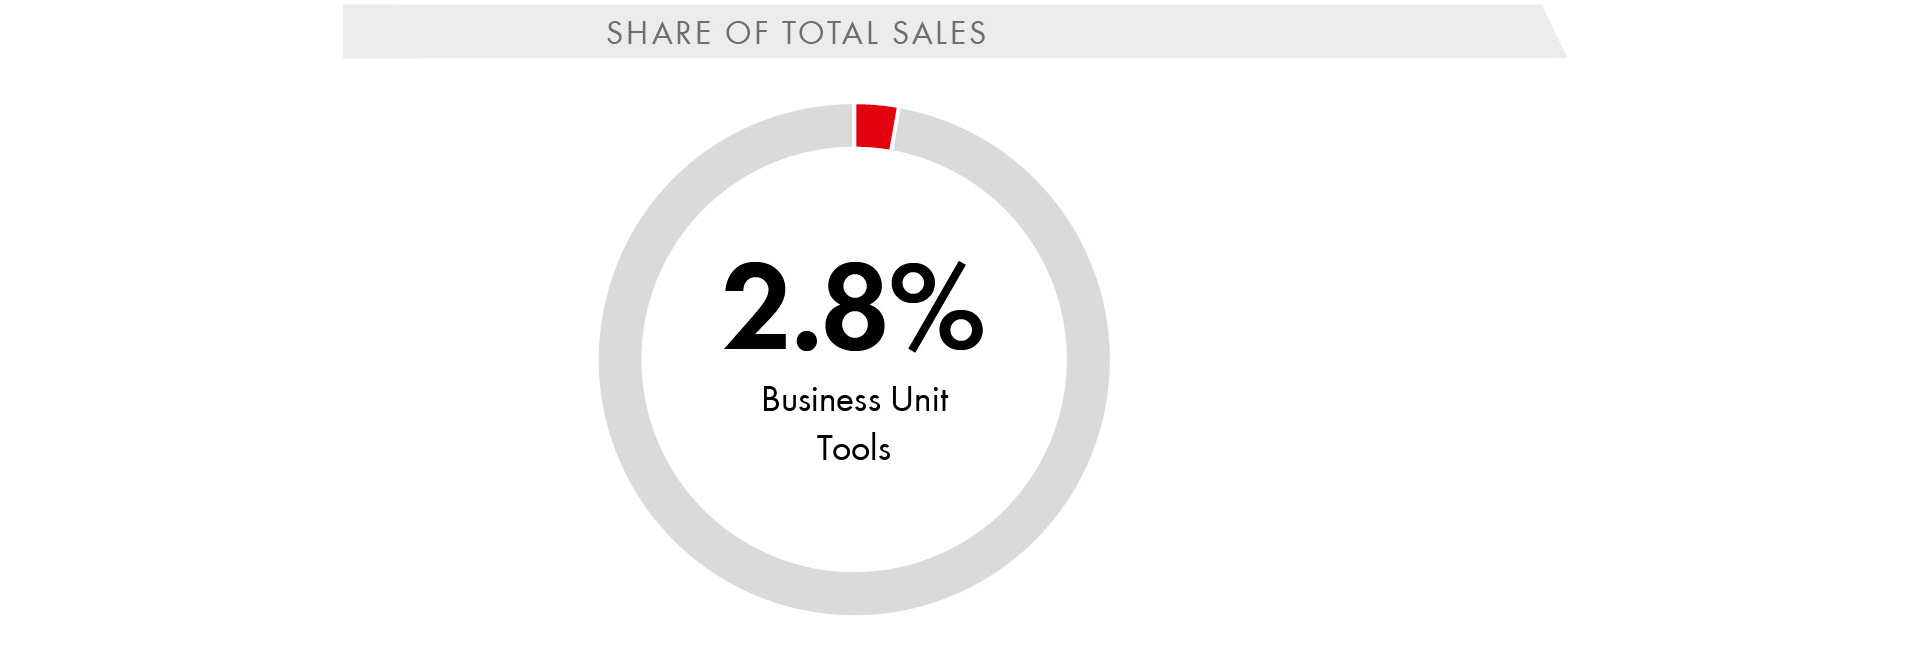 Share of total sales